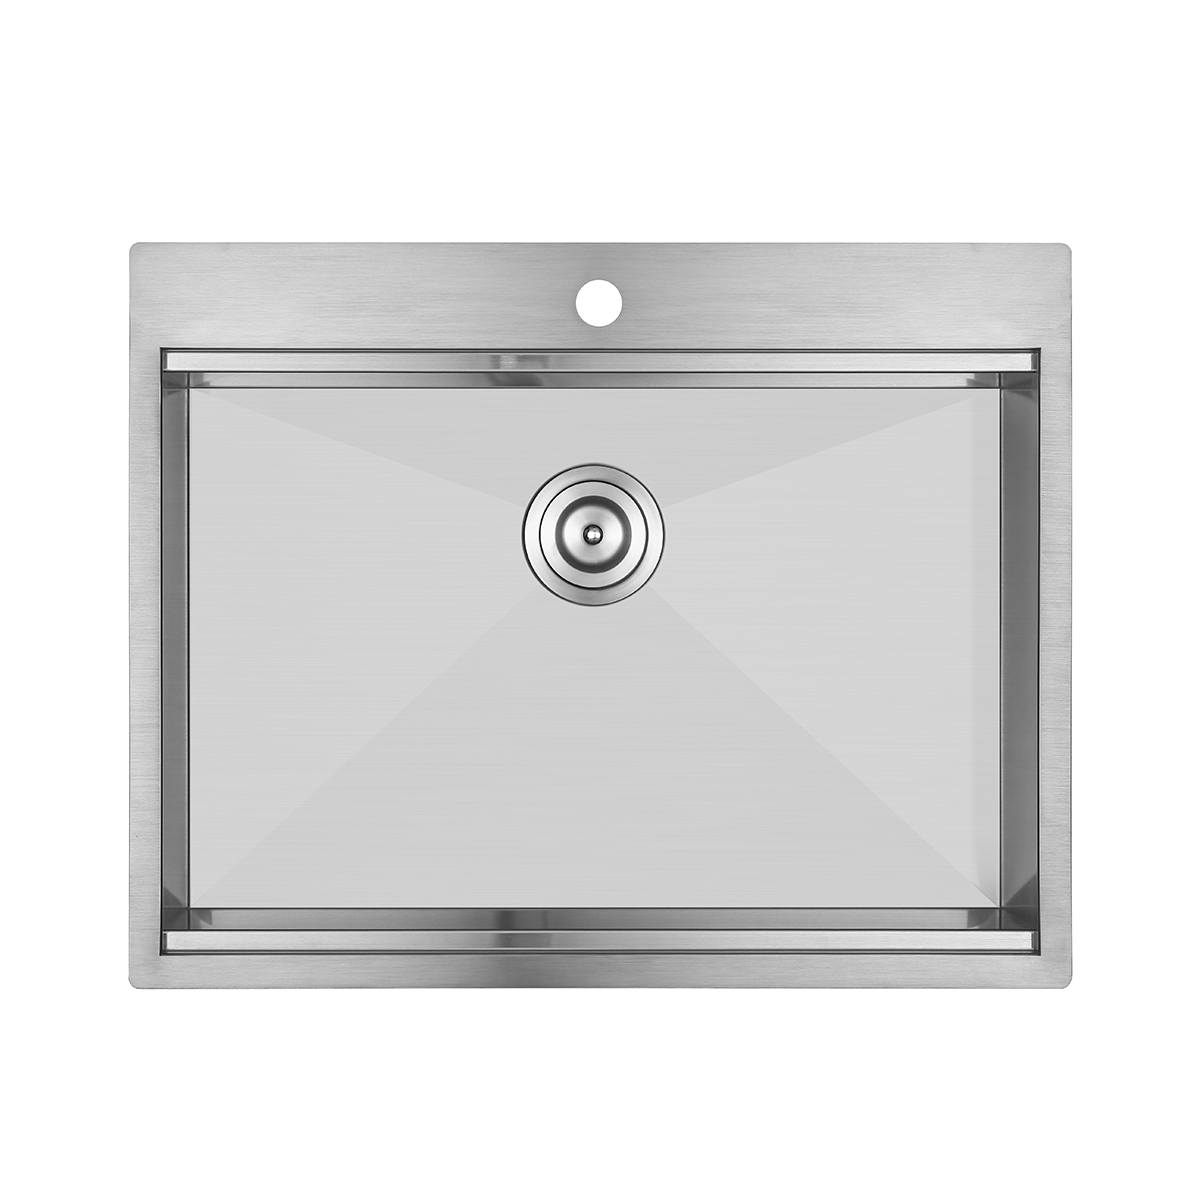 Silvery White Stainless Steel Handmade Topmount Kitchen Sink with Faucet Hole And Ledge